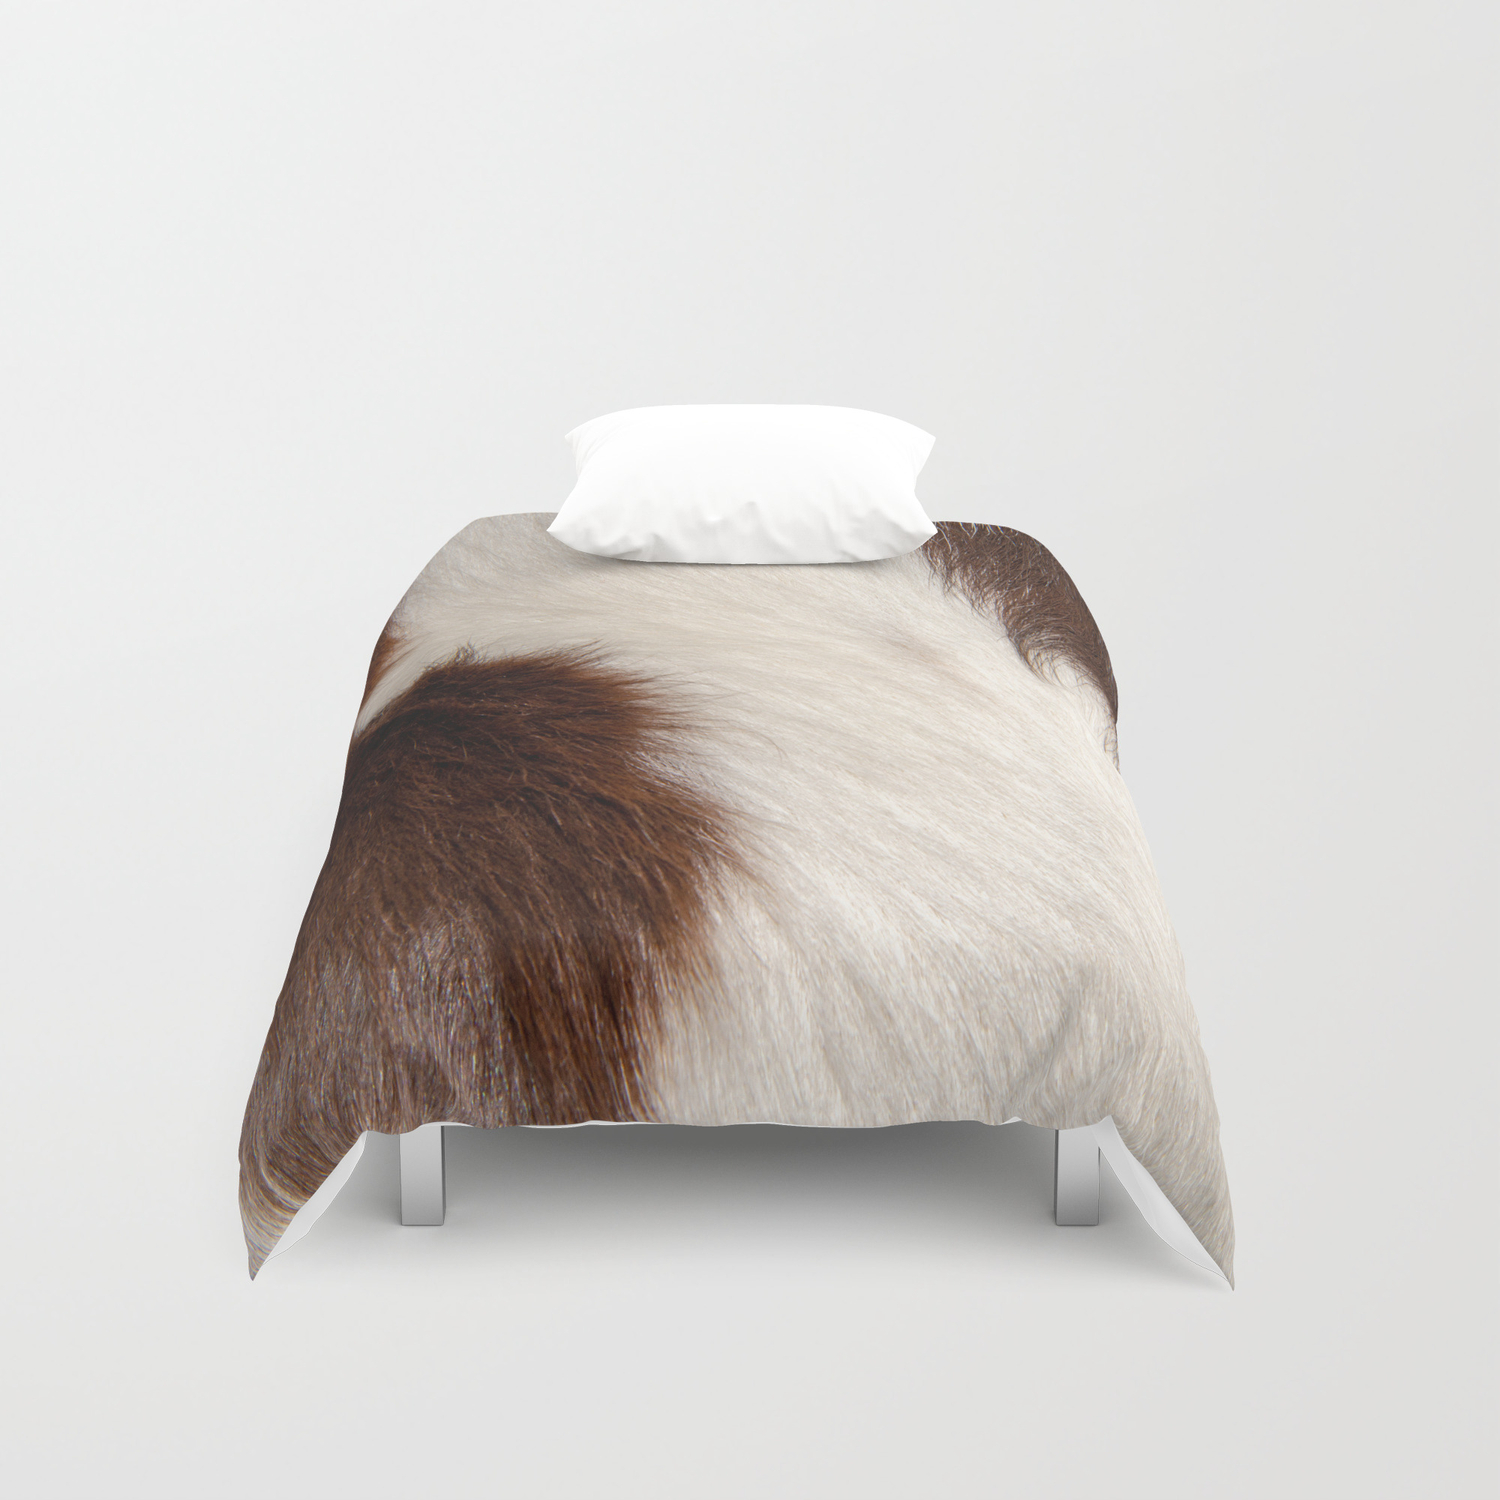 Animal Fur Brown And White Duvet Cover By Gypsykisspotography